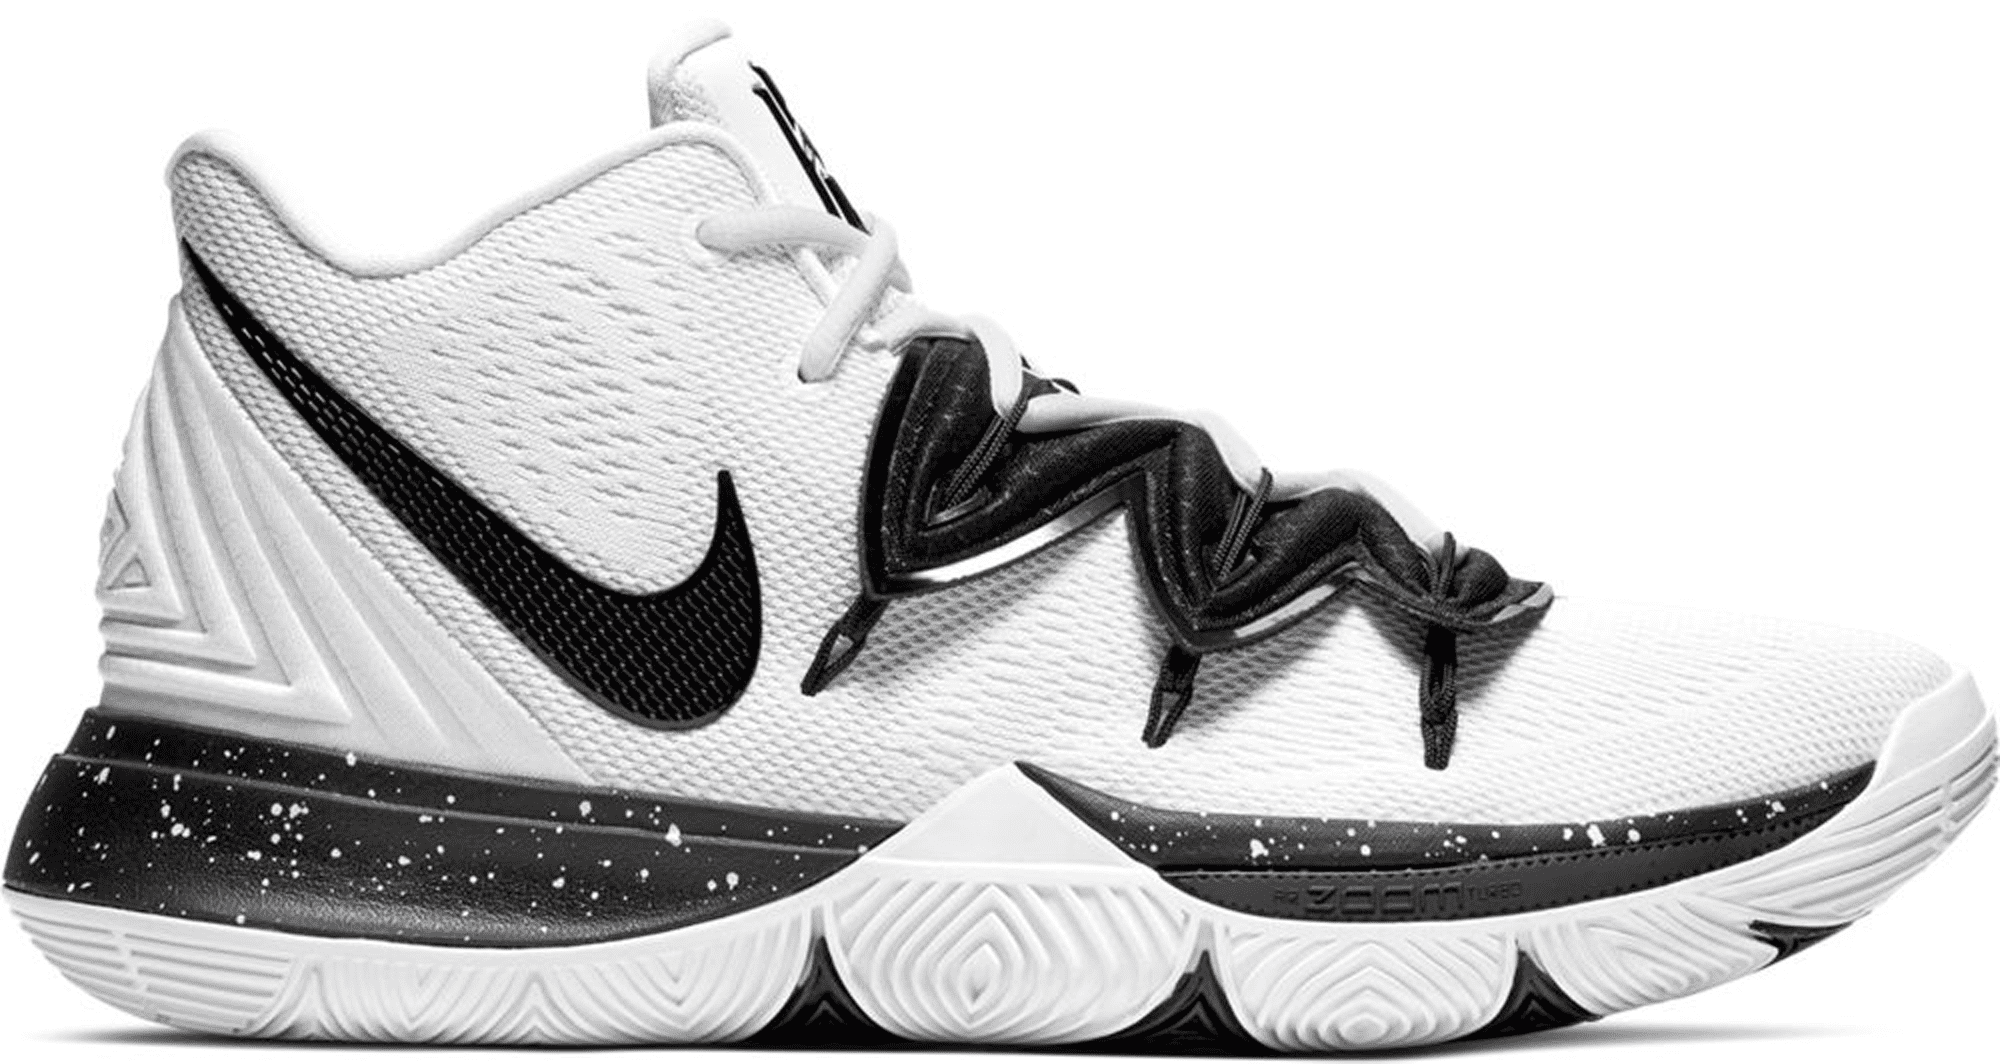 kyrie 5 size guide